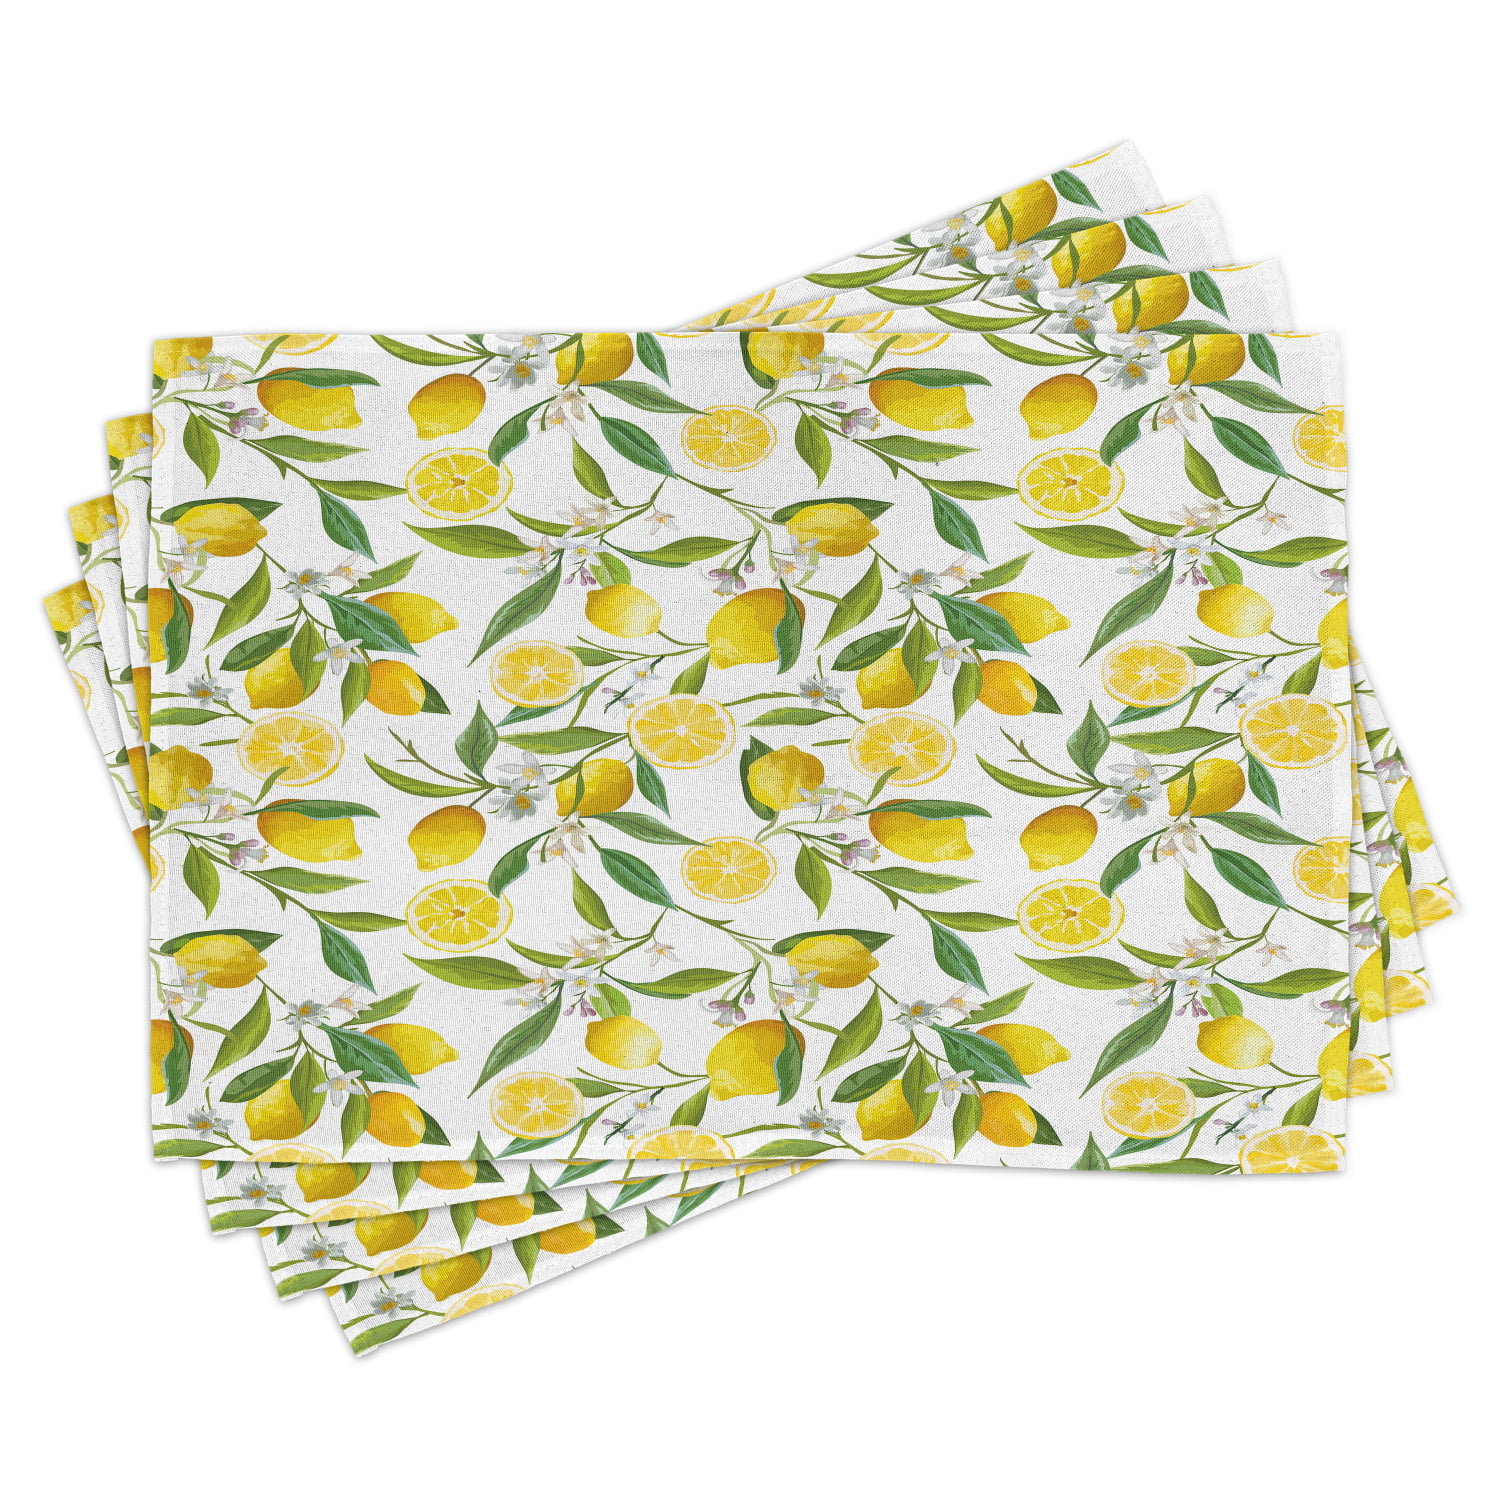 Washable Fabric Placemats for Dining Room Kitchen Table Decor Multicolor Sliced Lemons and Oranges Citrus Fruit and Leaves Pattern on Blue Shaded Background Ambesonne Fruits Place Mats Set of 4 